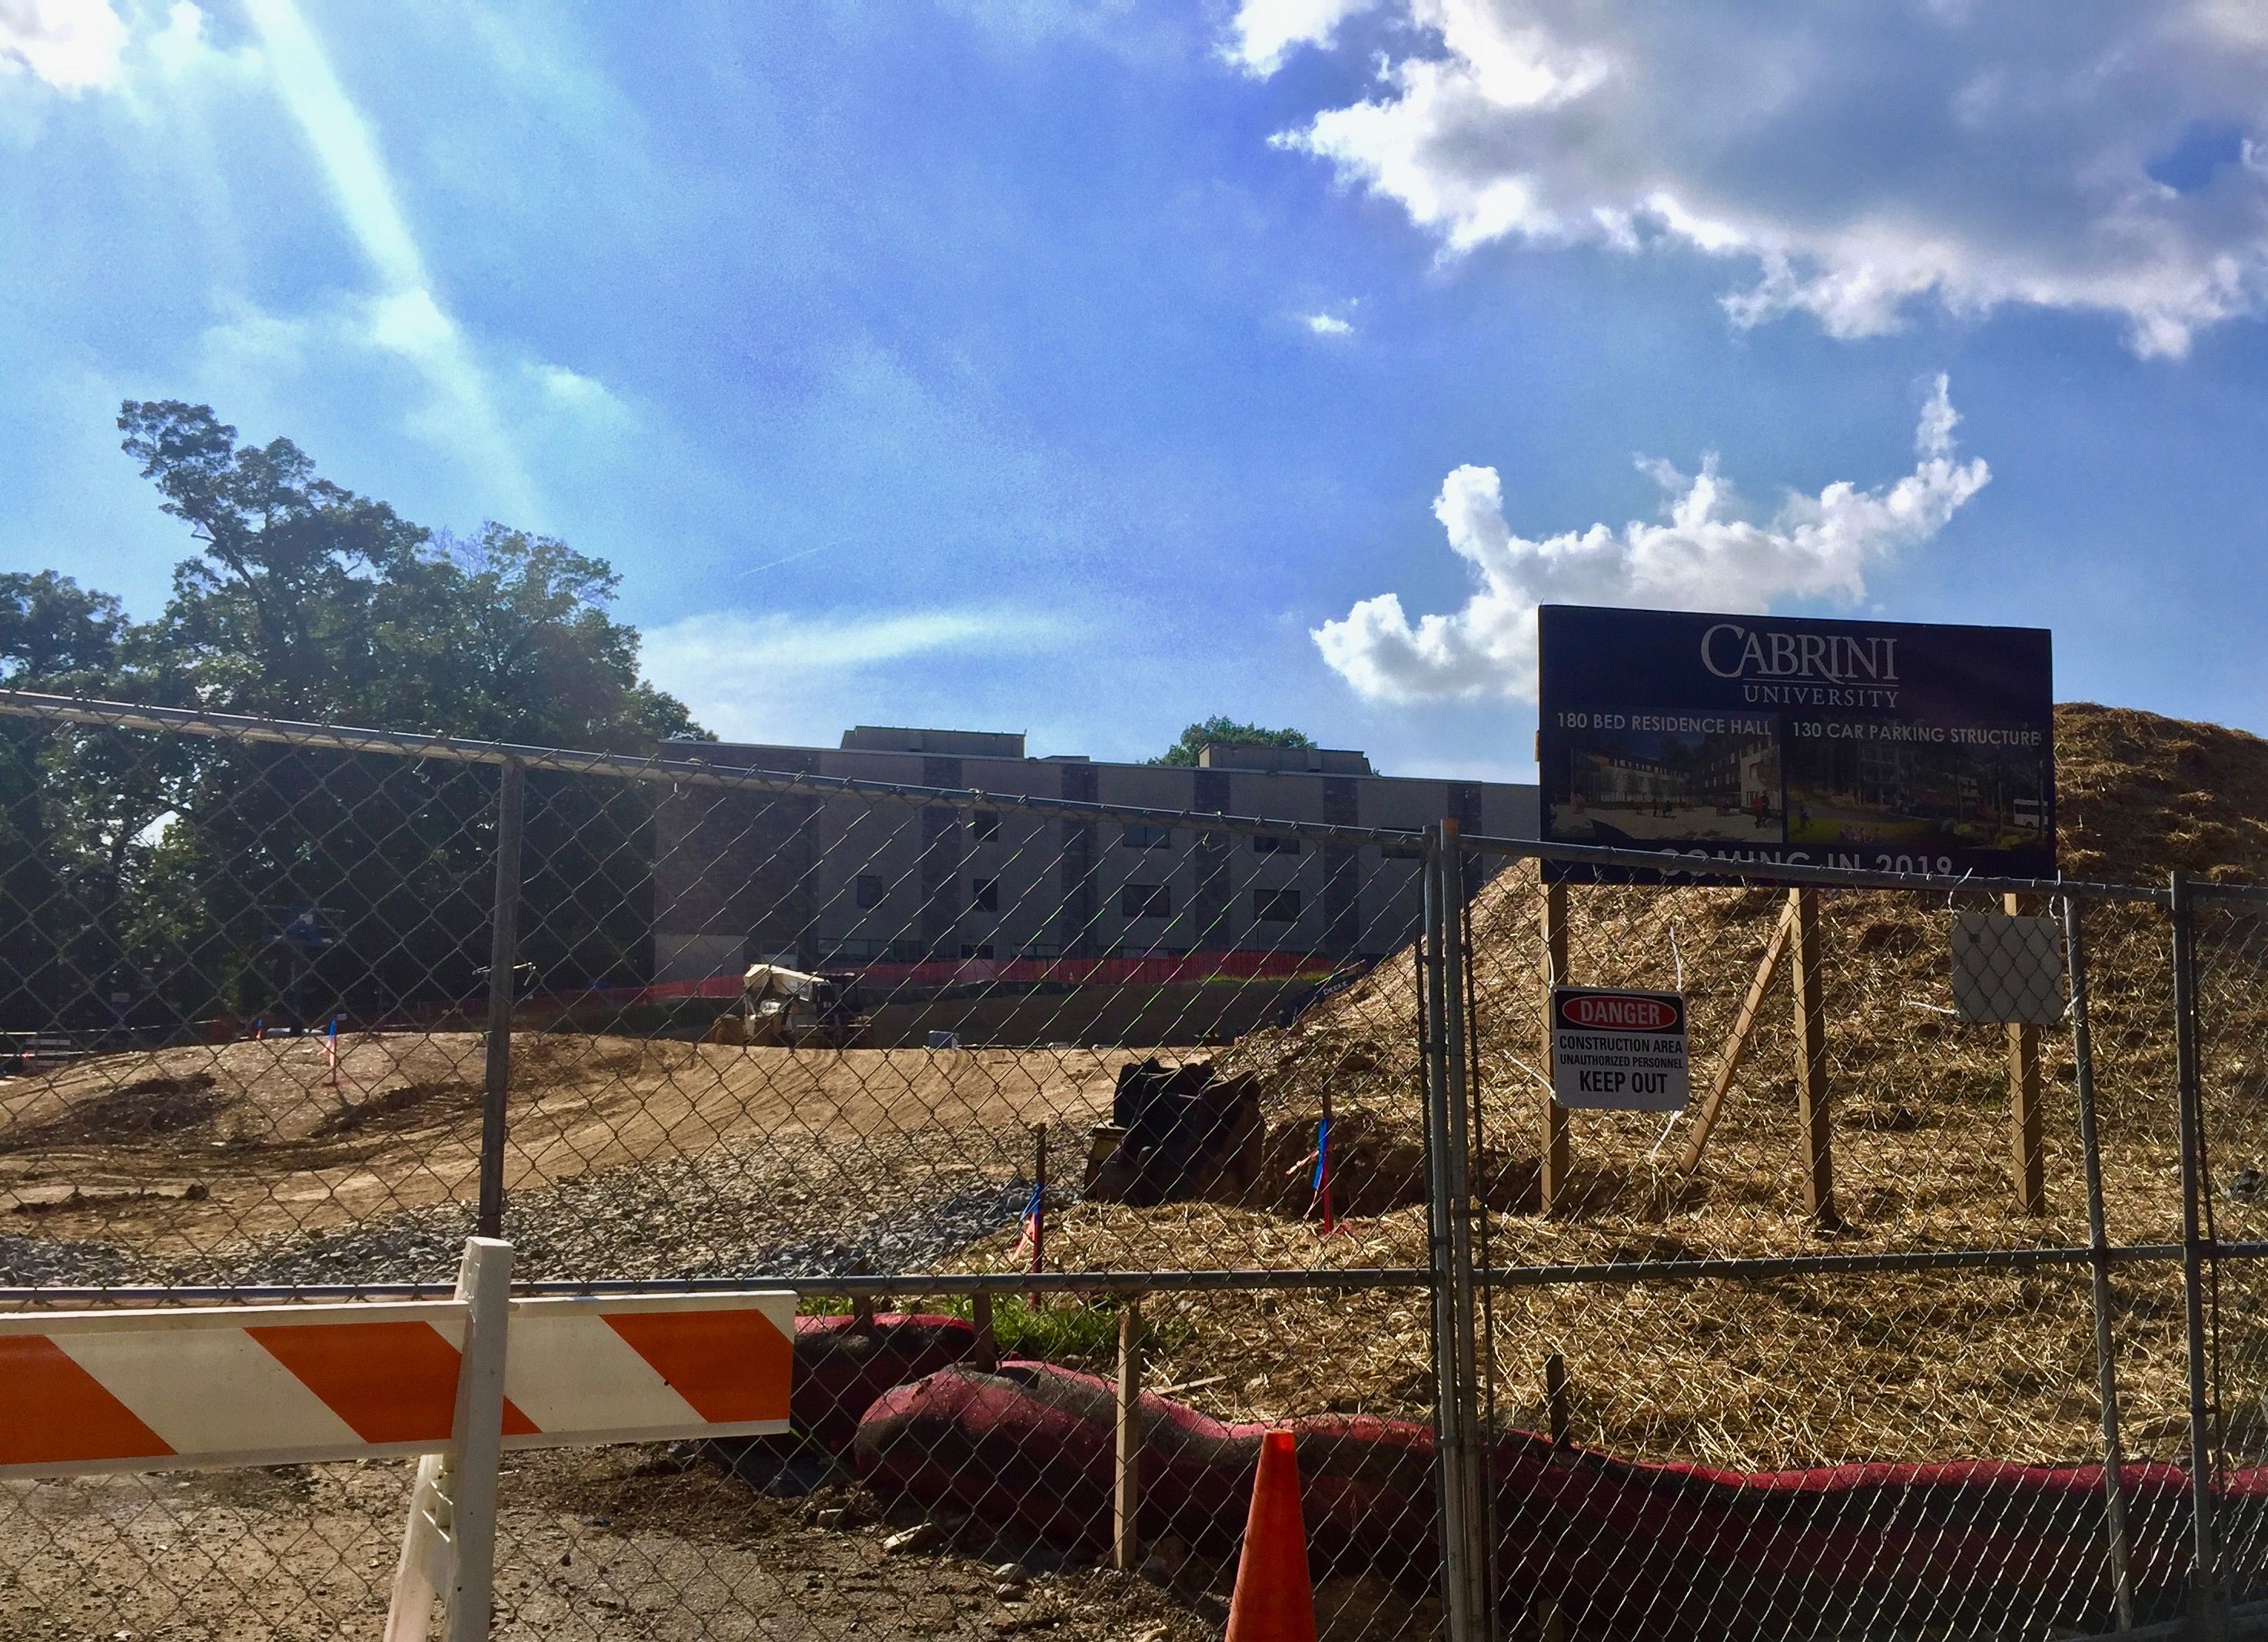 Construction on the anticipated parking garage at Cabrini University